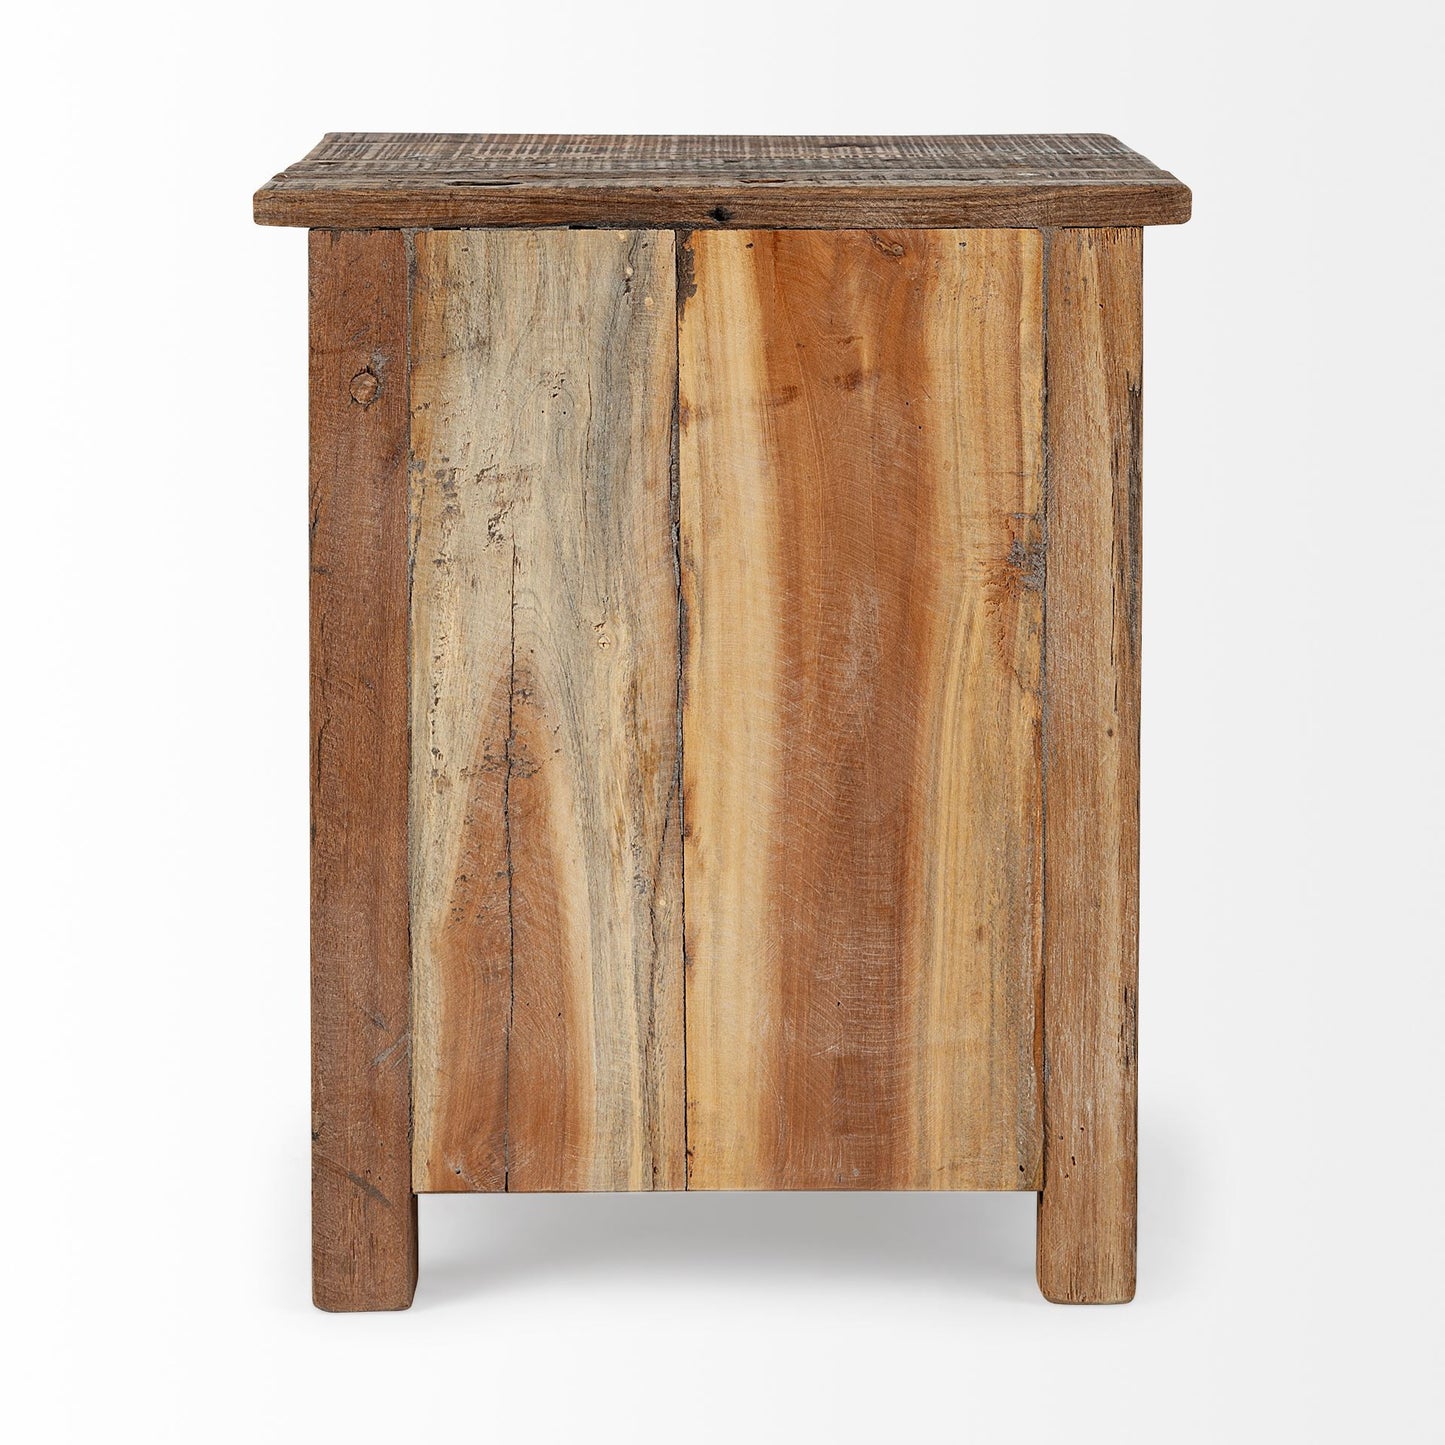 Medium Brown Wood Square Top End Table with Rustic Metal Drawers By Homeroots